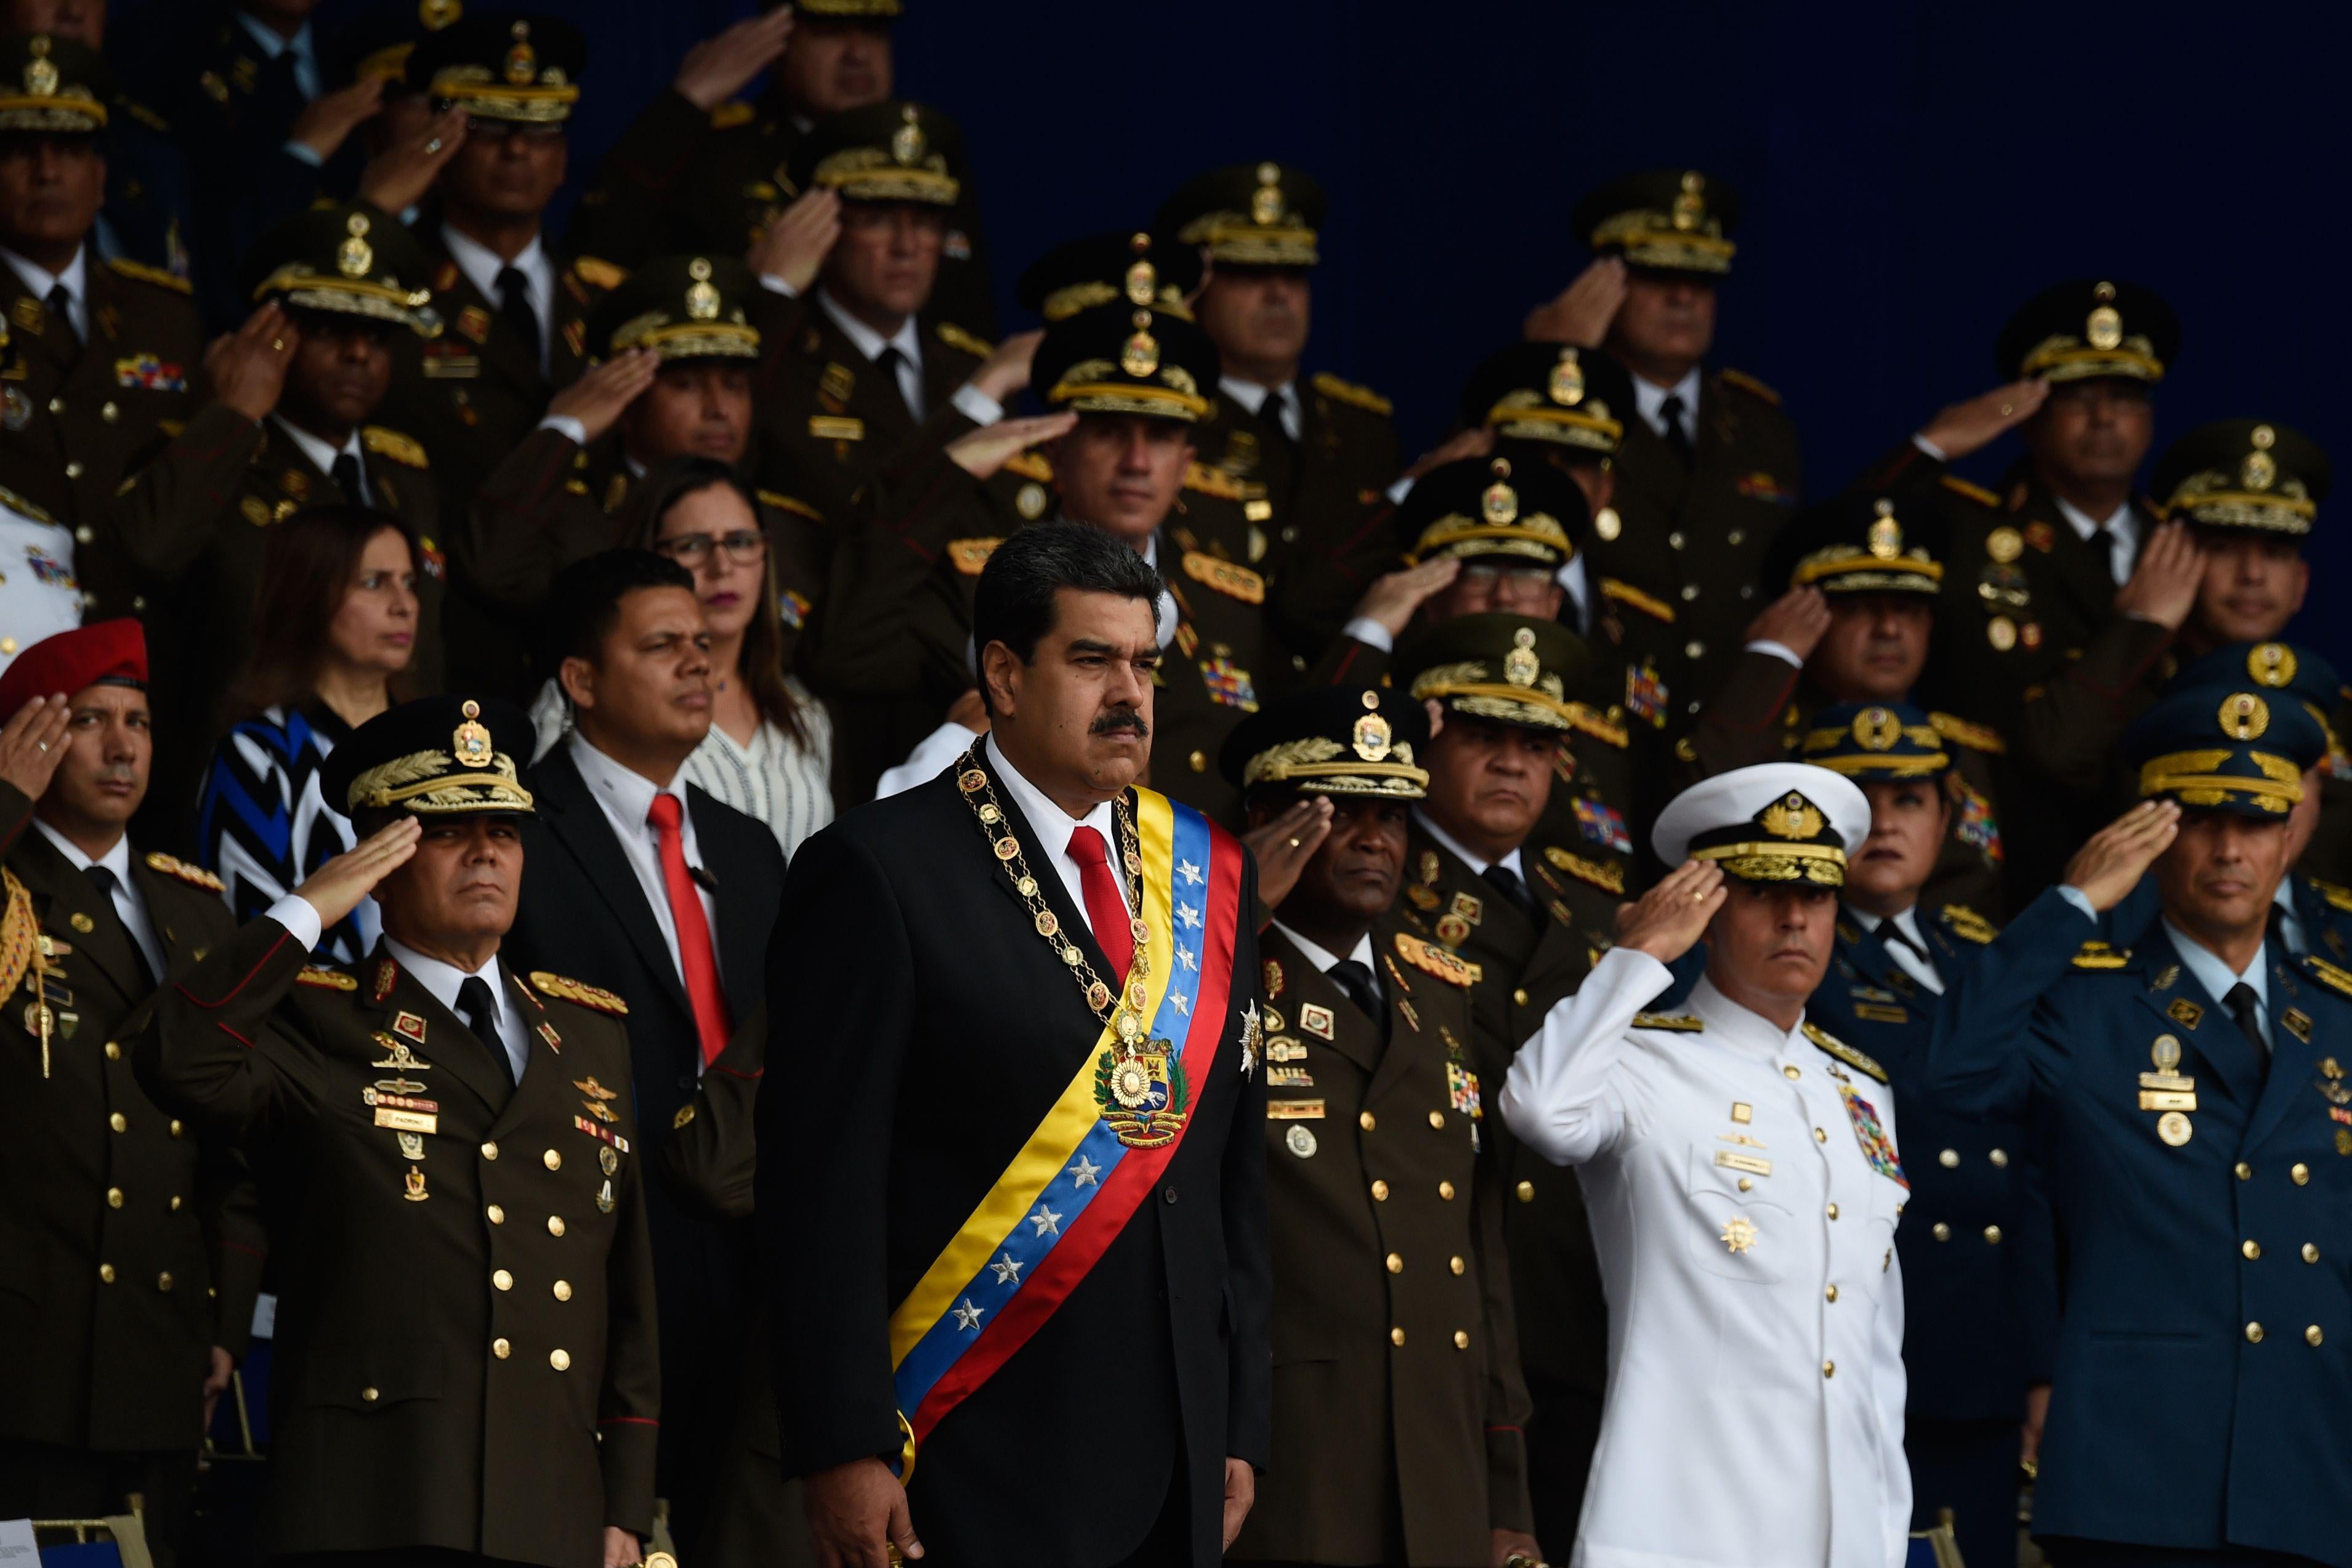 Venezuelan President Nicolás Maduro’s speech during a military ceremony on Saturday was interrupted by a loud bang that the government has linked to drones carrying explosives.